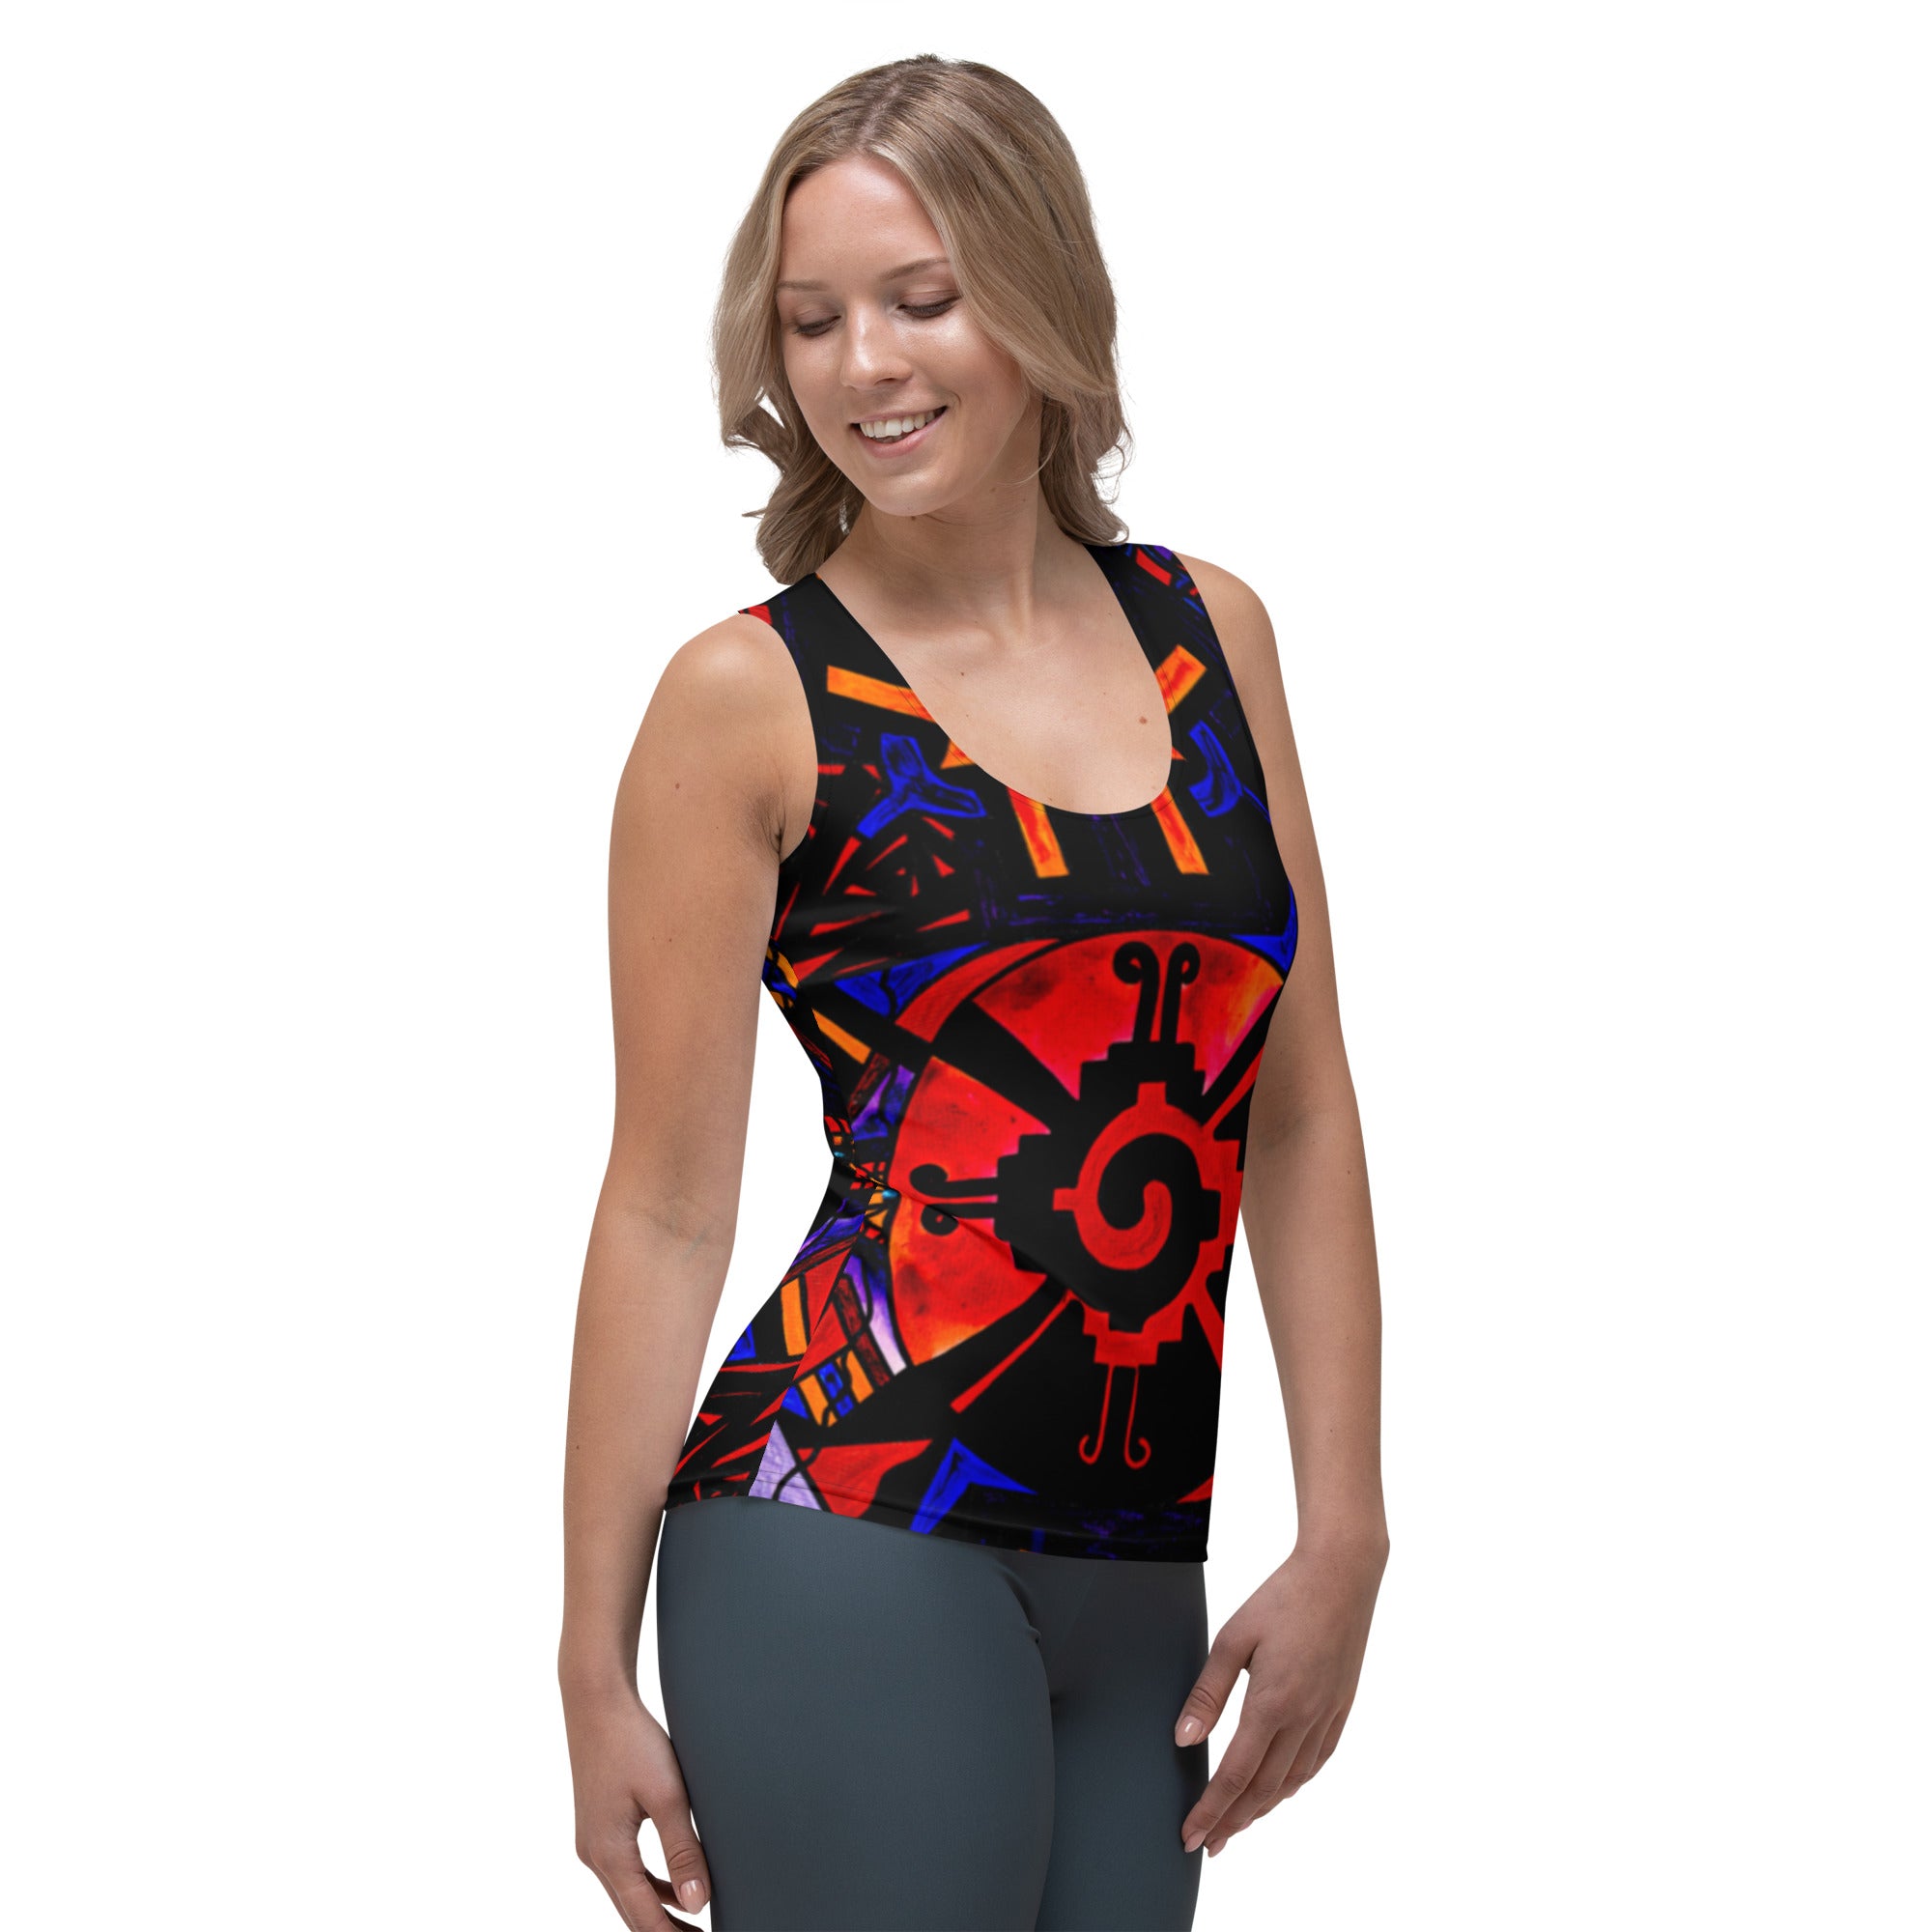 shop-our-official-alnilam-strength-grid-sublimation-cut-sew-tank-top-online-hot-sale_3.jpg